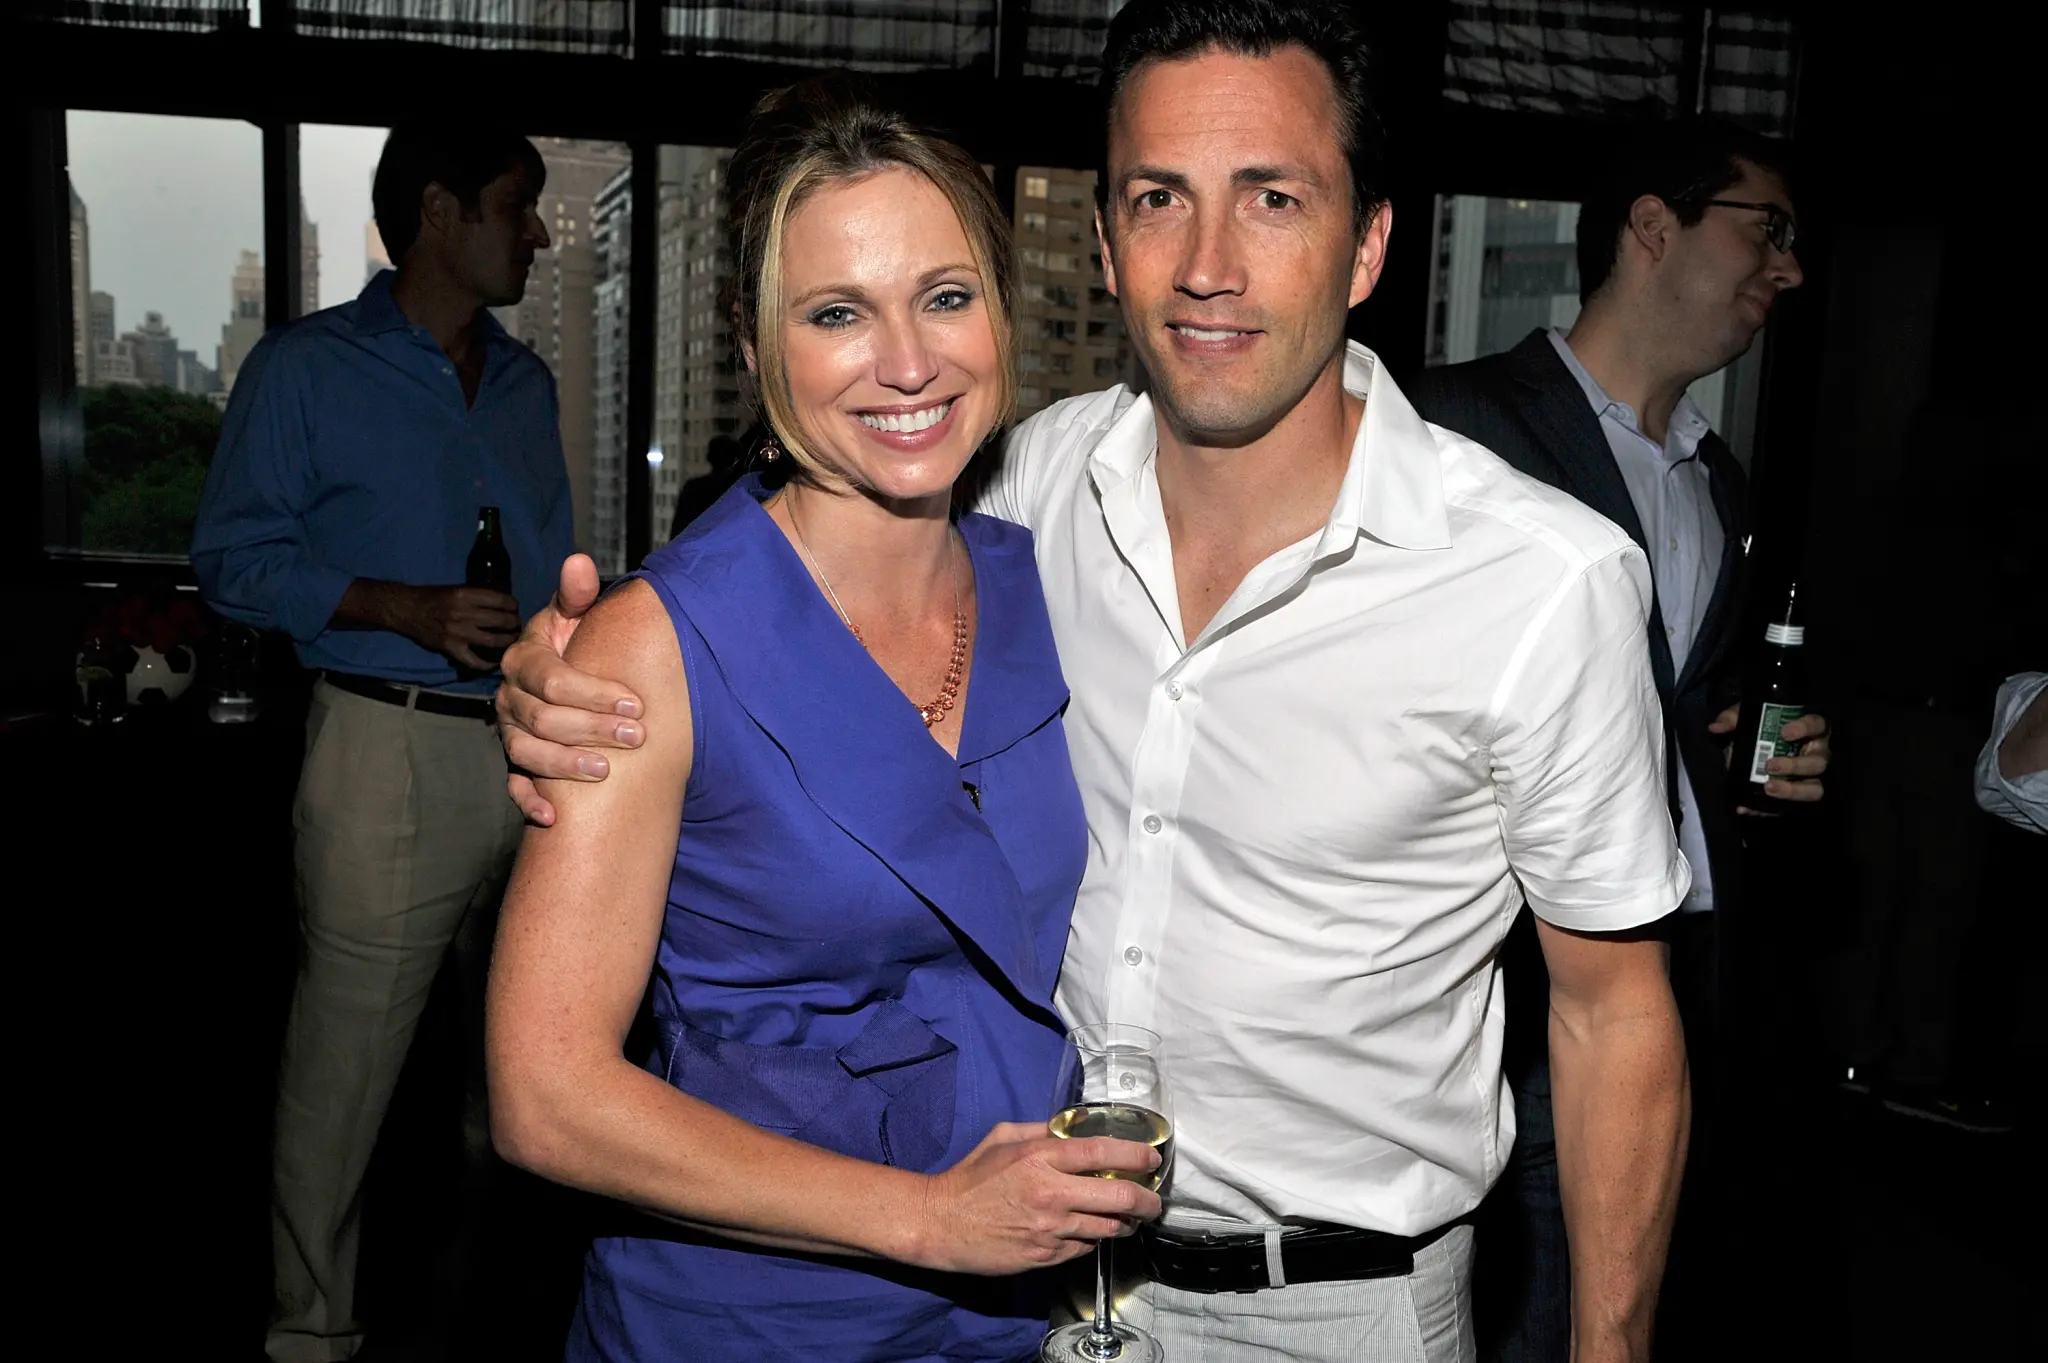 The Ring That Never Was: Amy Robach's Unconventional Lesson on Love and Loss